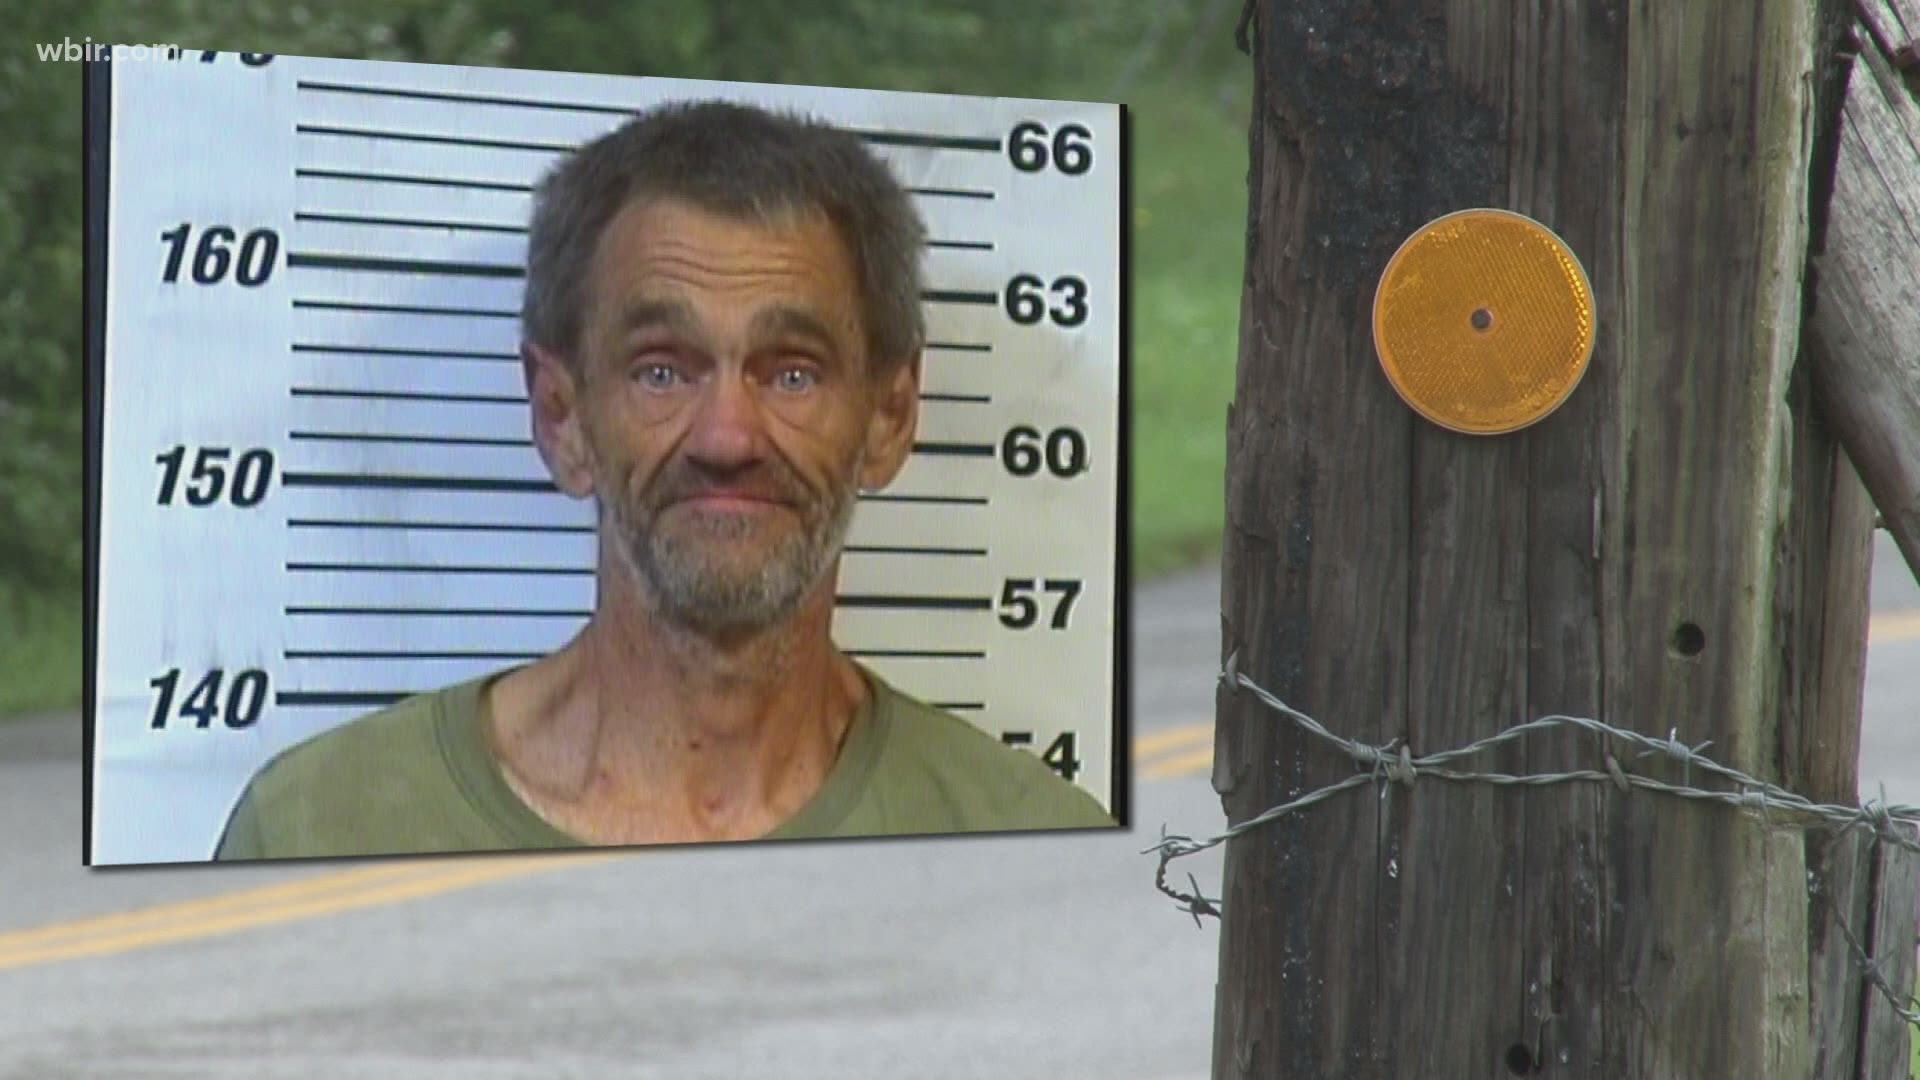 The sheriff's department said deputy Tim Tutor pulled over 57-year-old Mark Eberly just after 7 p.m.